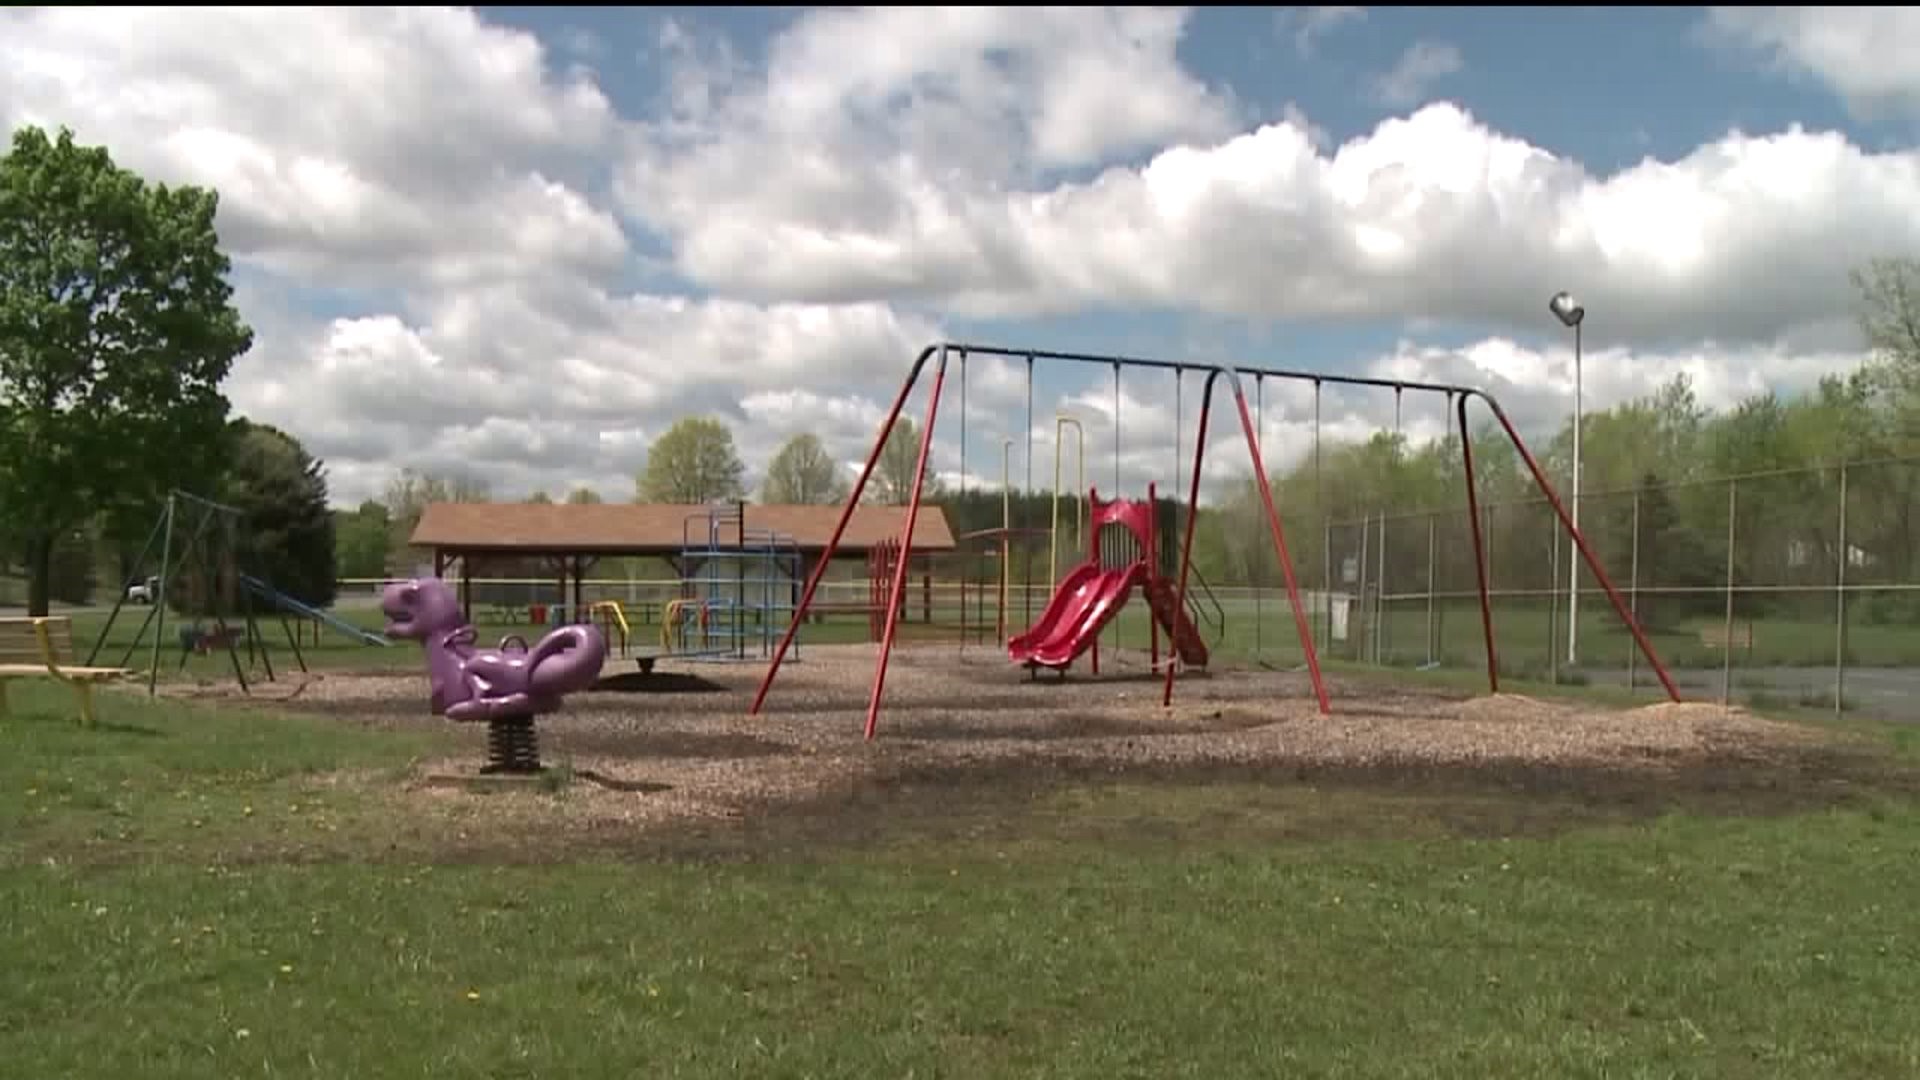 Group Works to Revamp Community Park